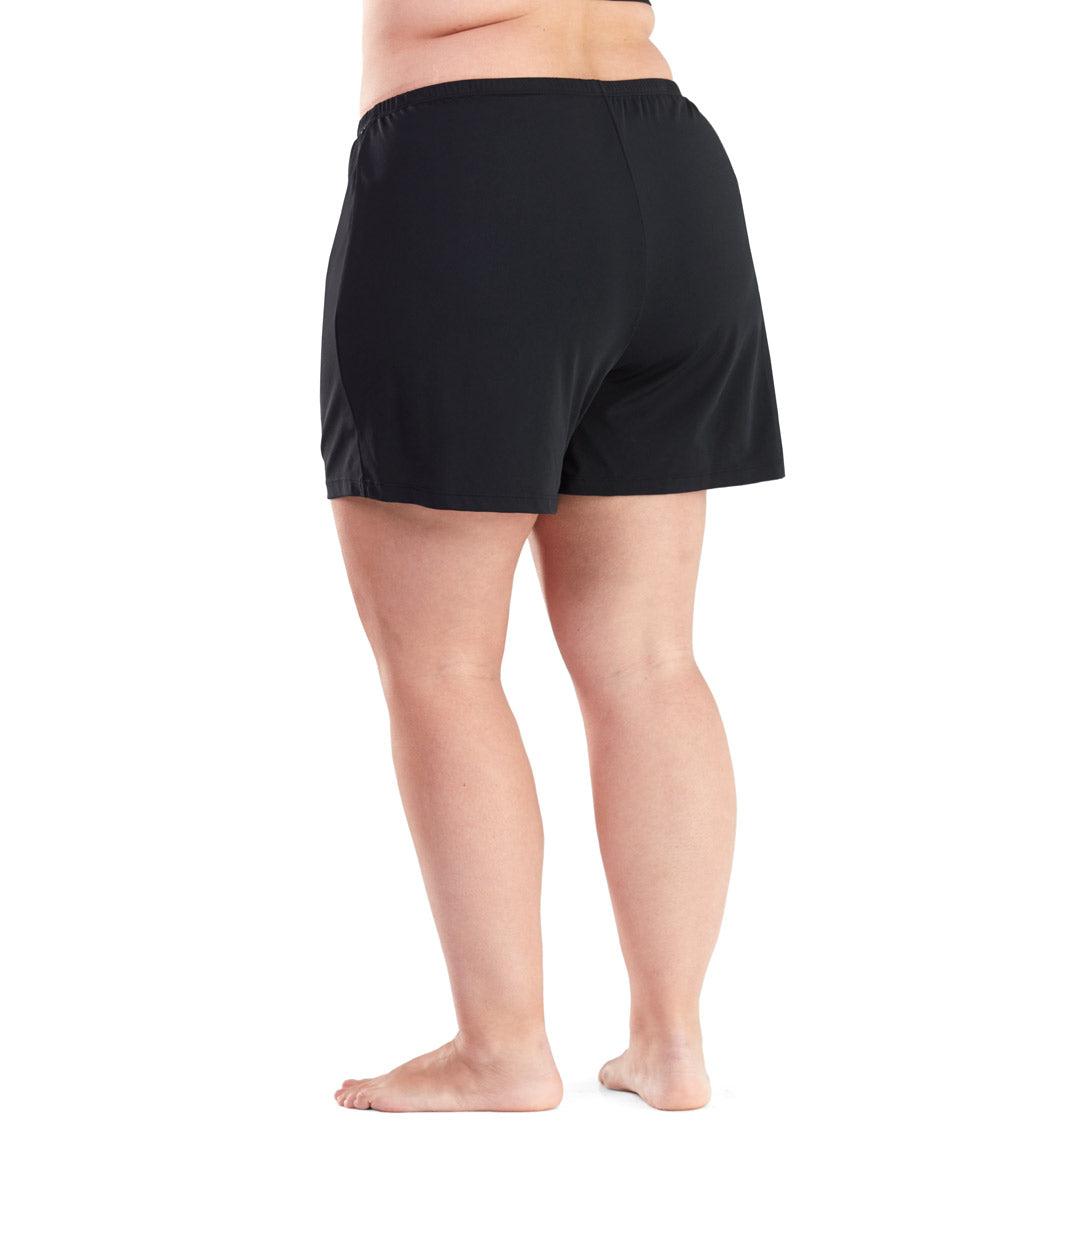 Plus size woman, back view, wearing AquaSport Swim Short with Brief in solid black. Loose leg opening landing mid-thigh.